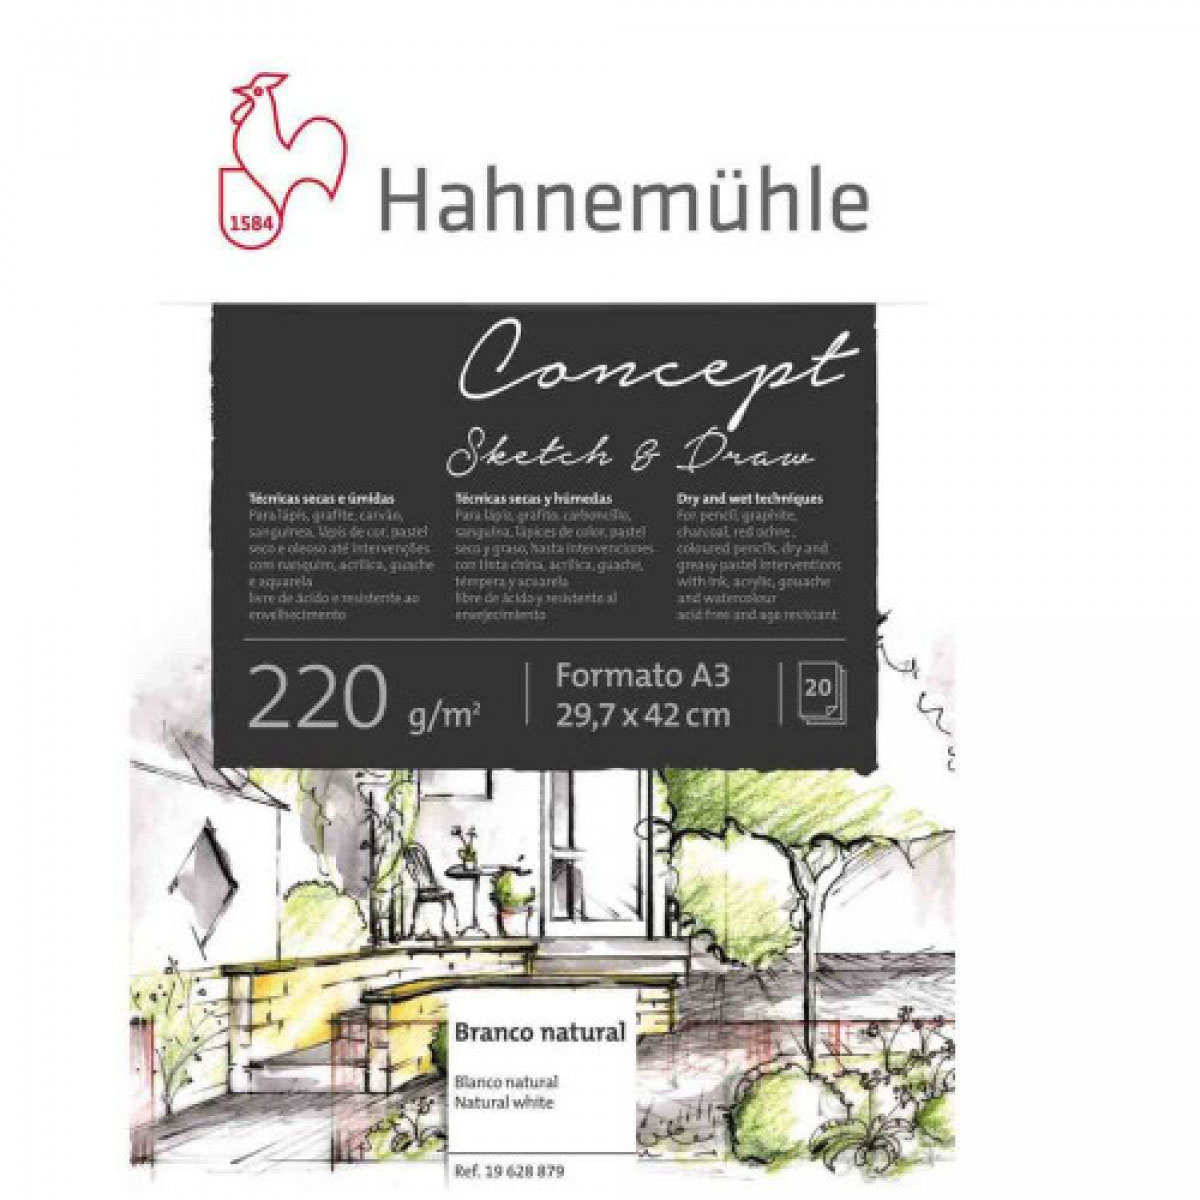 Concept Sketch & Draw Hahnemhle 220g/m2 A3 20fls